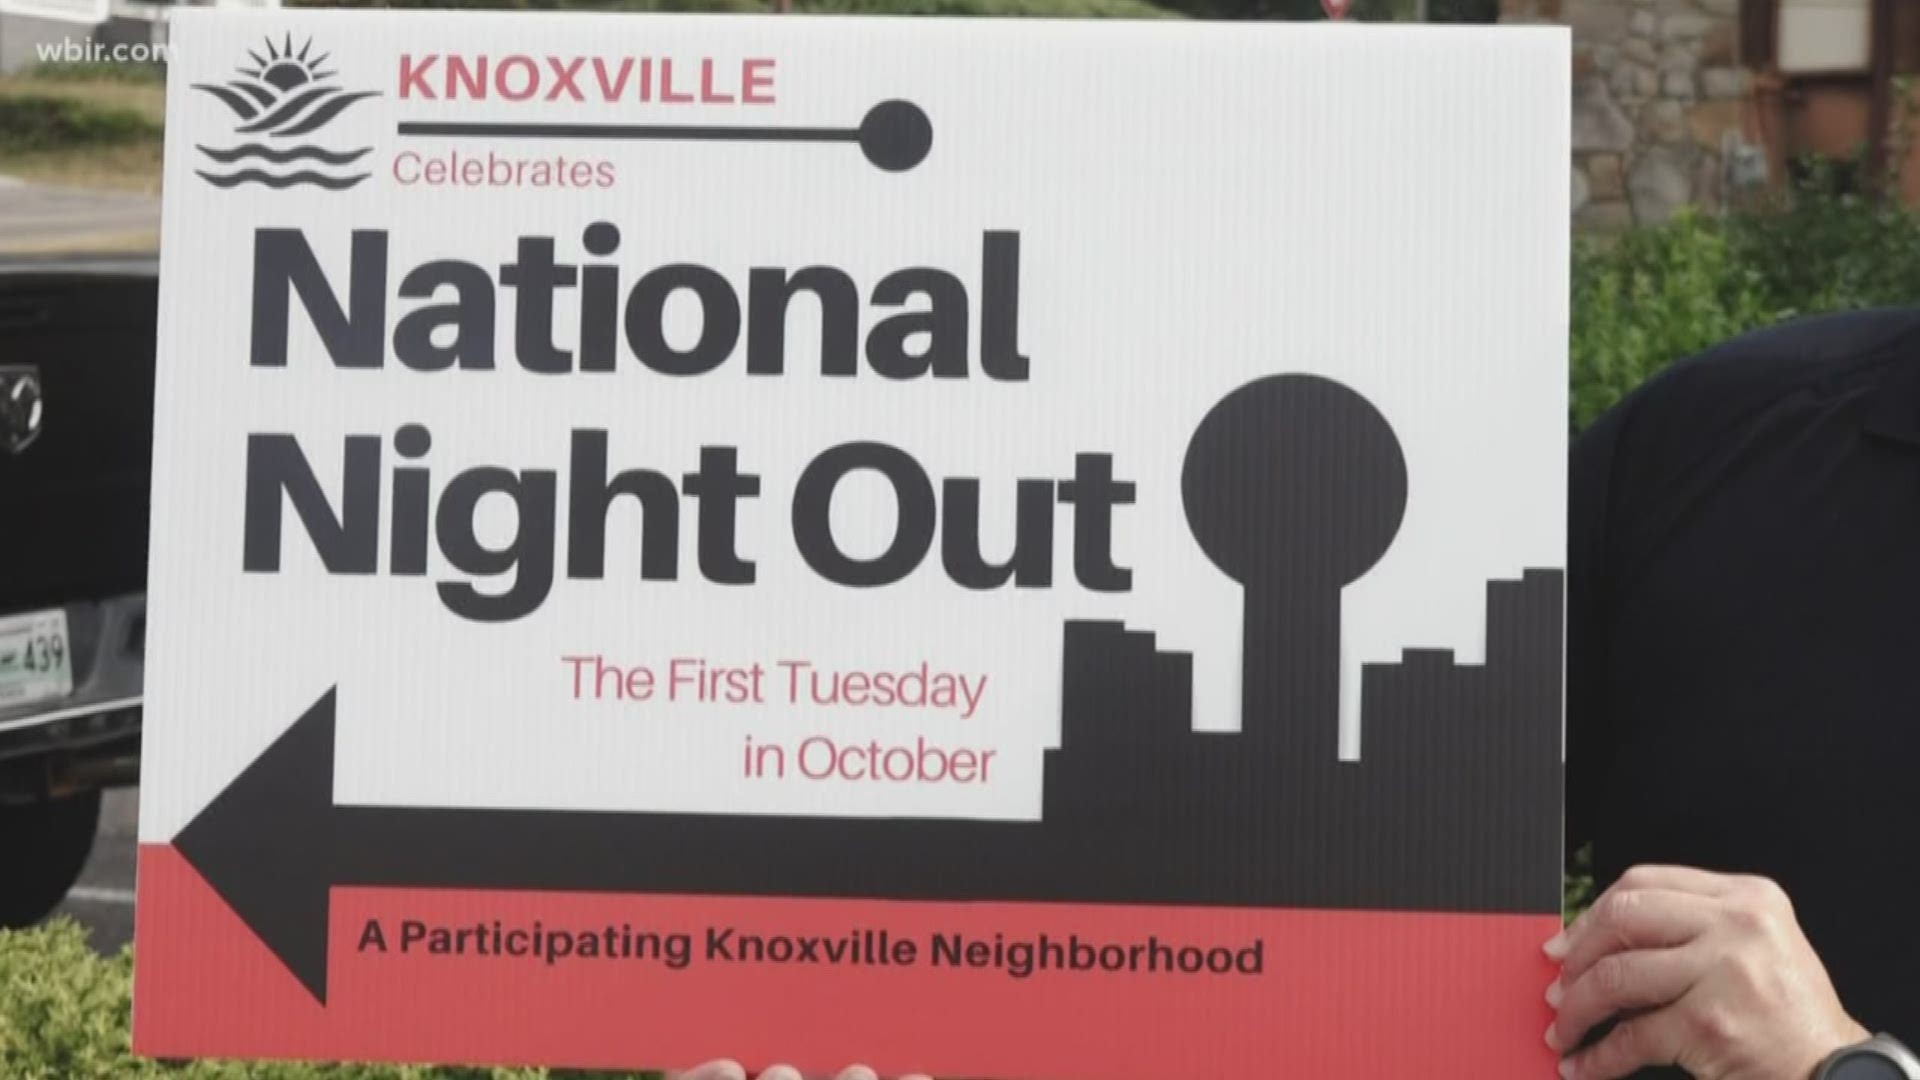 KPD to hold National Night Out to get out in the community and have cookouts to meet people in the areas they patrol.